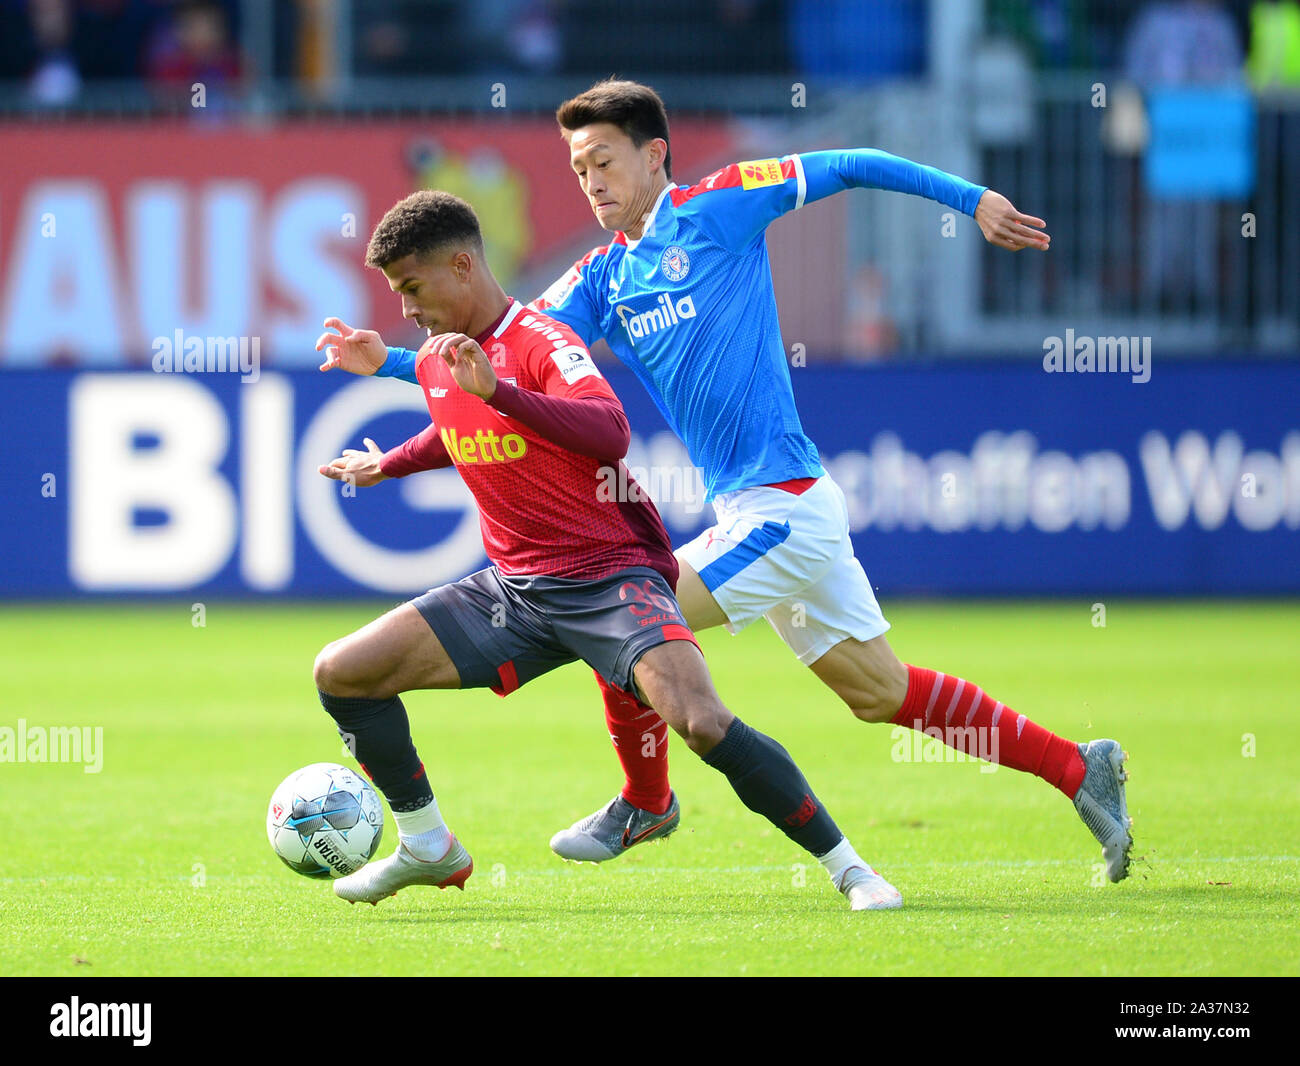 Kiel, Germany. 06th Oct, 2019. Soccer: 2nd Bundesliga, Matchday 9: Holstein Kiel - Jahn Regensburg in Holstein Stadium. Regensburg's Chima Okoroji (l) and Kiel's Jae-Sung Lee fight for the ball. Credit: Daniel Bockwoldt/dpa - IMPORTANT NOTE: In accordance with the requirements of the DFL Deutsche Fußball Liga or the DFB Deutscher Fußball-Bund, it is prohibited to use or have used photographs taken in the stadium and/or the match in the form of sequence images and/or video-like photo sequences./dpa/Alamy Live News Stock Photo